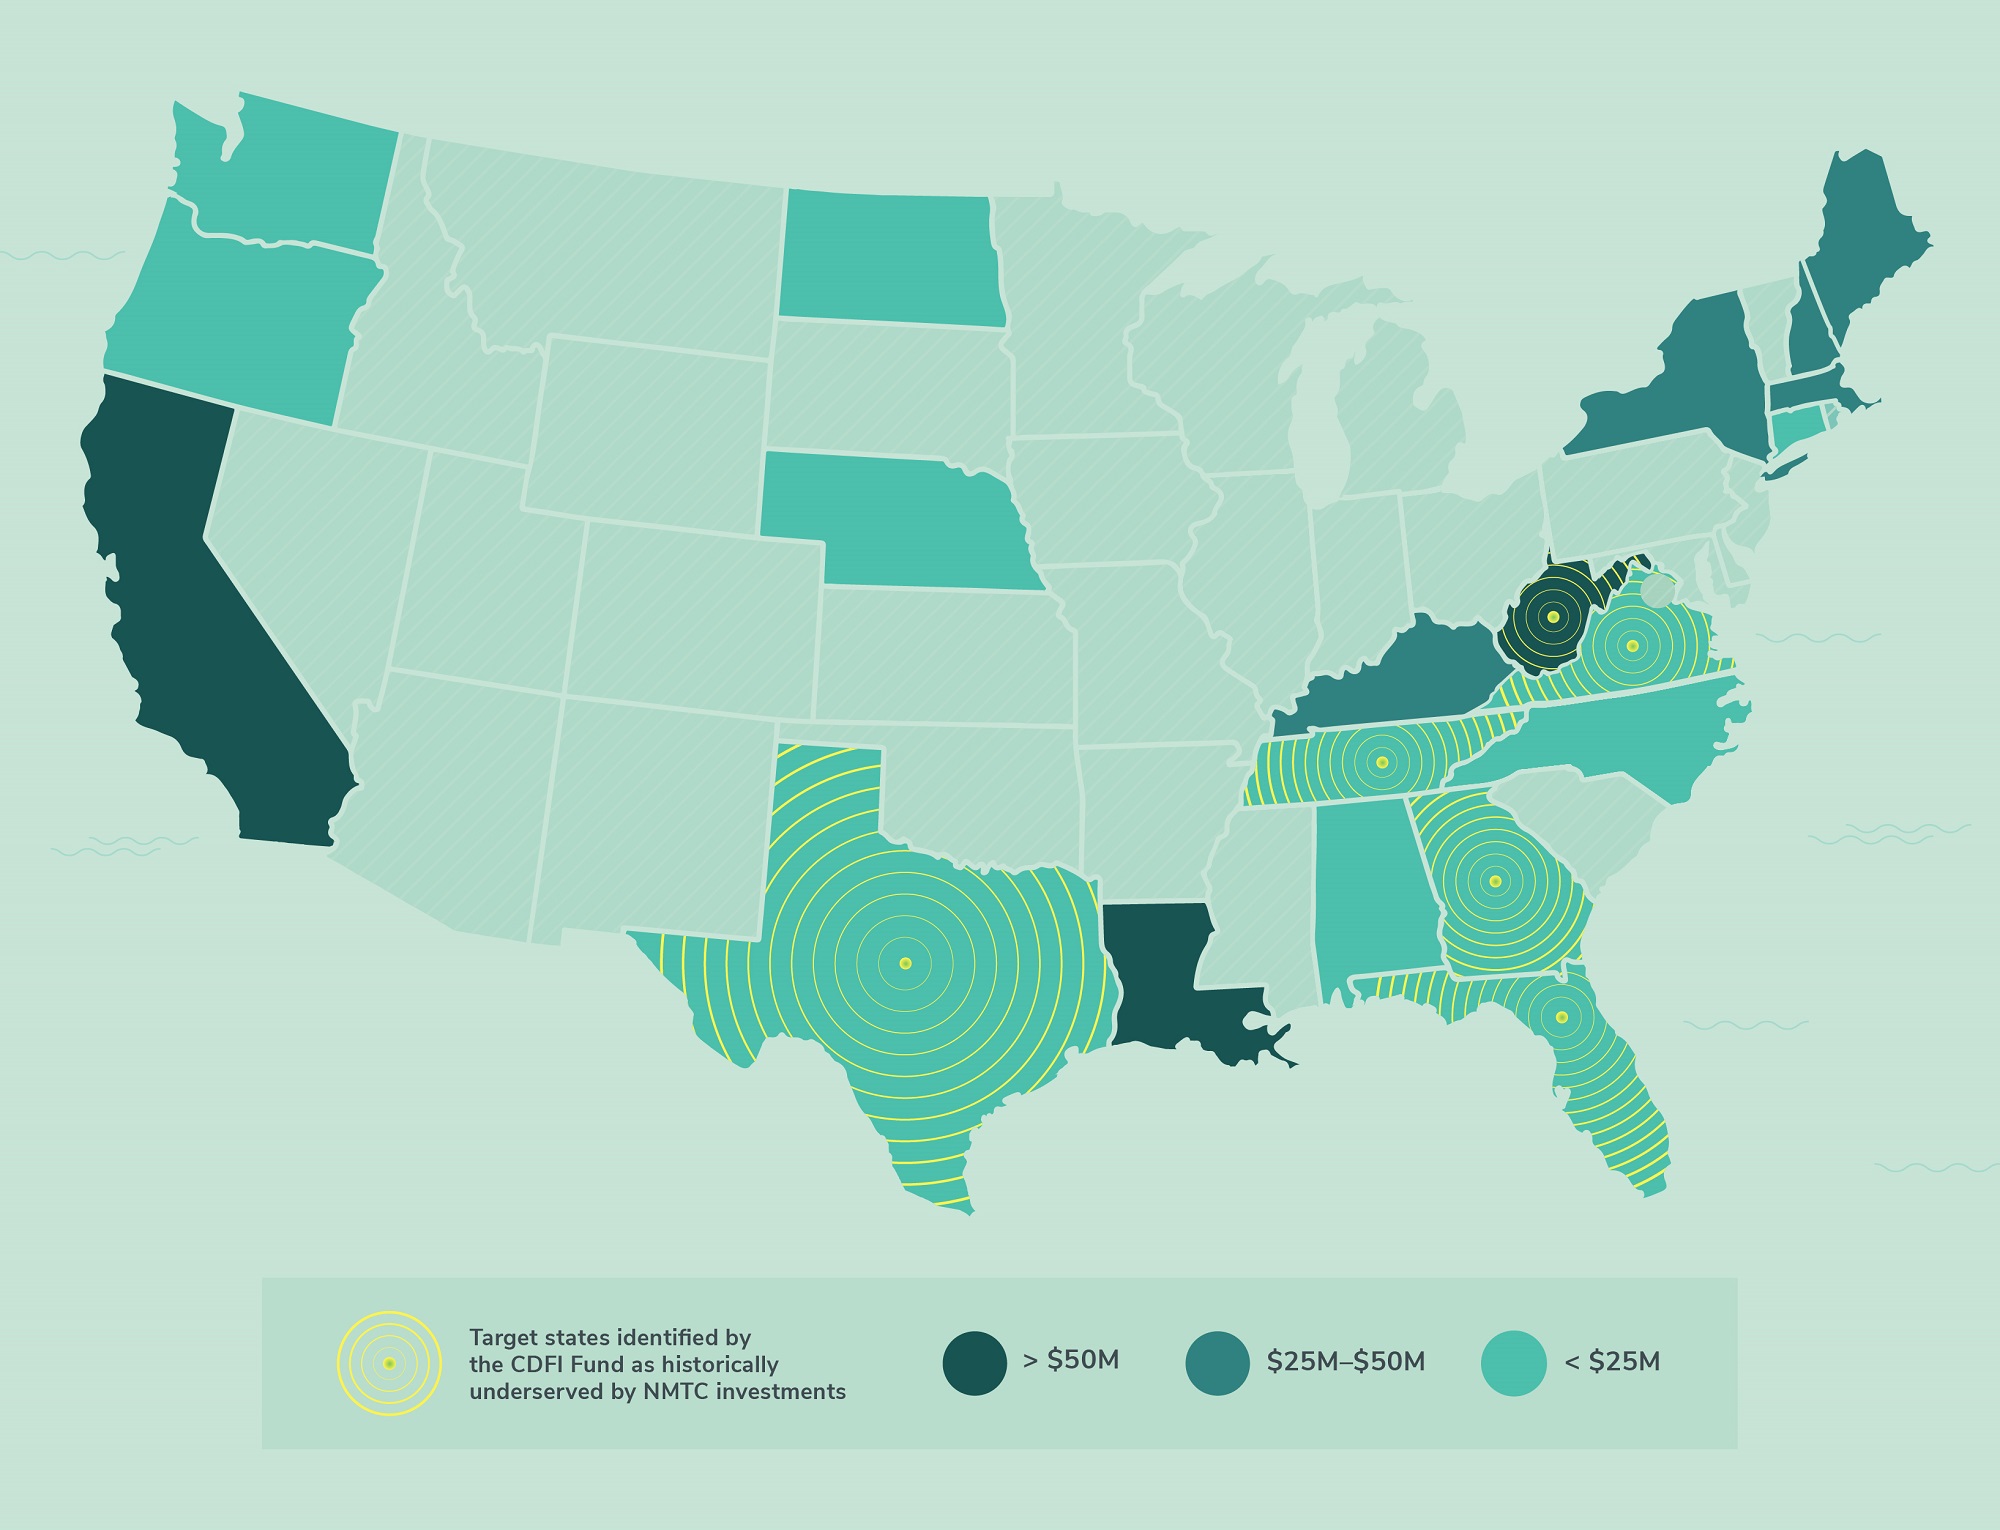 Map of the US indicating the 22 states where BlueHub has made NMTC investments and target states identified by the CDFI Fund: TX, GA, FL, TN, VA, WV  